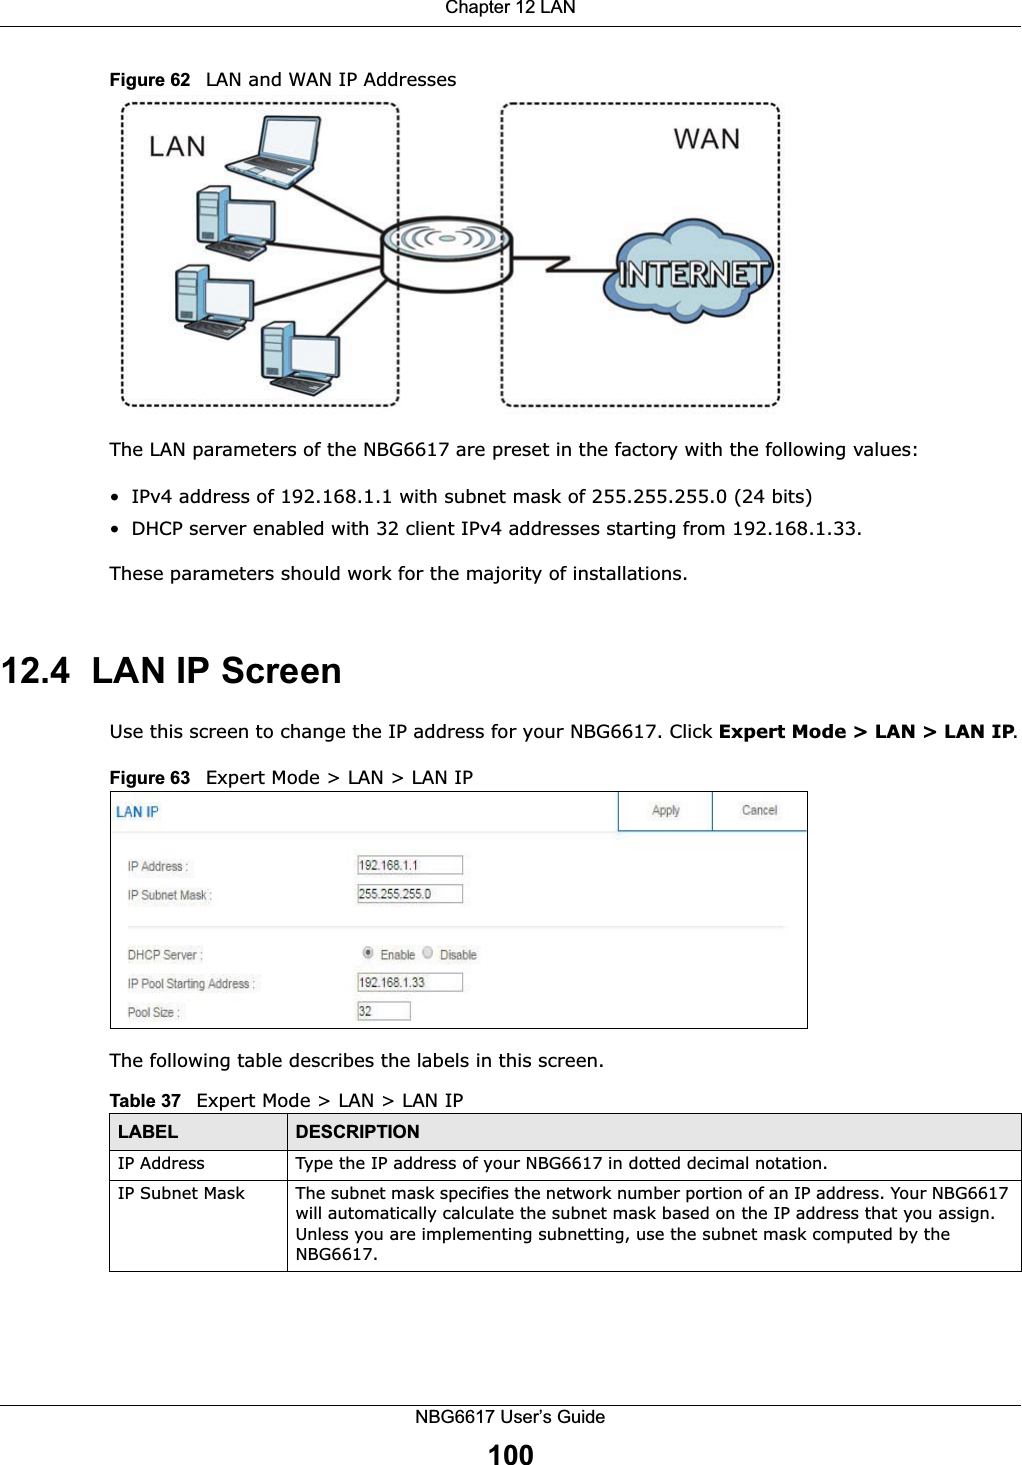 Chapter 12 LANNBG6617 User’s Guide100Figure 62   LAN and WAN IP AddressesThe LAN parameters of the NBG6617 are preset in the factory with the following values:• IPv4 address of 192.168.1.1 with subnet mask of 255.255.255.0 (24 bits)• DHCP server enabled with 32 client IPv4 addresses starting from 192.168.1.33. These parameters should work for the majority of installations.12.4  LAN IP ScreenUse this screen to change the IP address for your NBG6617. Click Expert Mode &gt; LAN &gt; LAN IP.Figure 63   Expert Mode &gt; LAN &gt; LAN IP The following table describes the labels in this screen.Table 37   Expert Mode &gt; LAN &gt; LAN IPLABEL DESCRIPTIONIP Address Type the IP address of your NBG6617 in dotted decimal notation.IP Subnet Mask The subnet mask specifies the network number portion of an IP address. Your NBG6617 will automatically calculate the subnet mask based on the IP address that you assign. Unless you are implementing subnetting, use the subnet mask computed by the NBG6617.